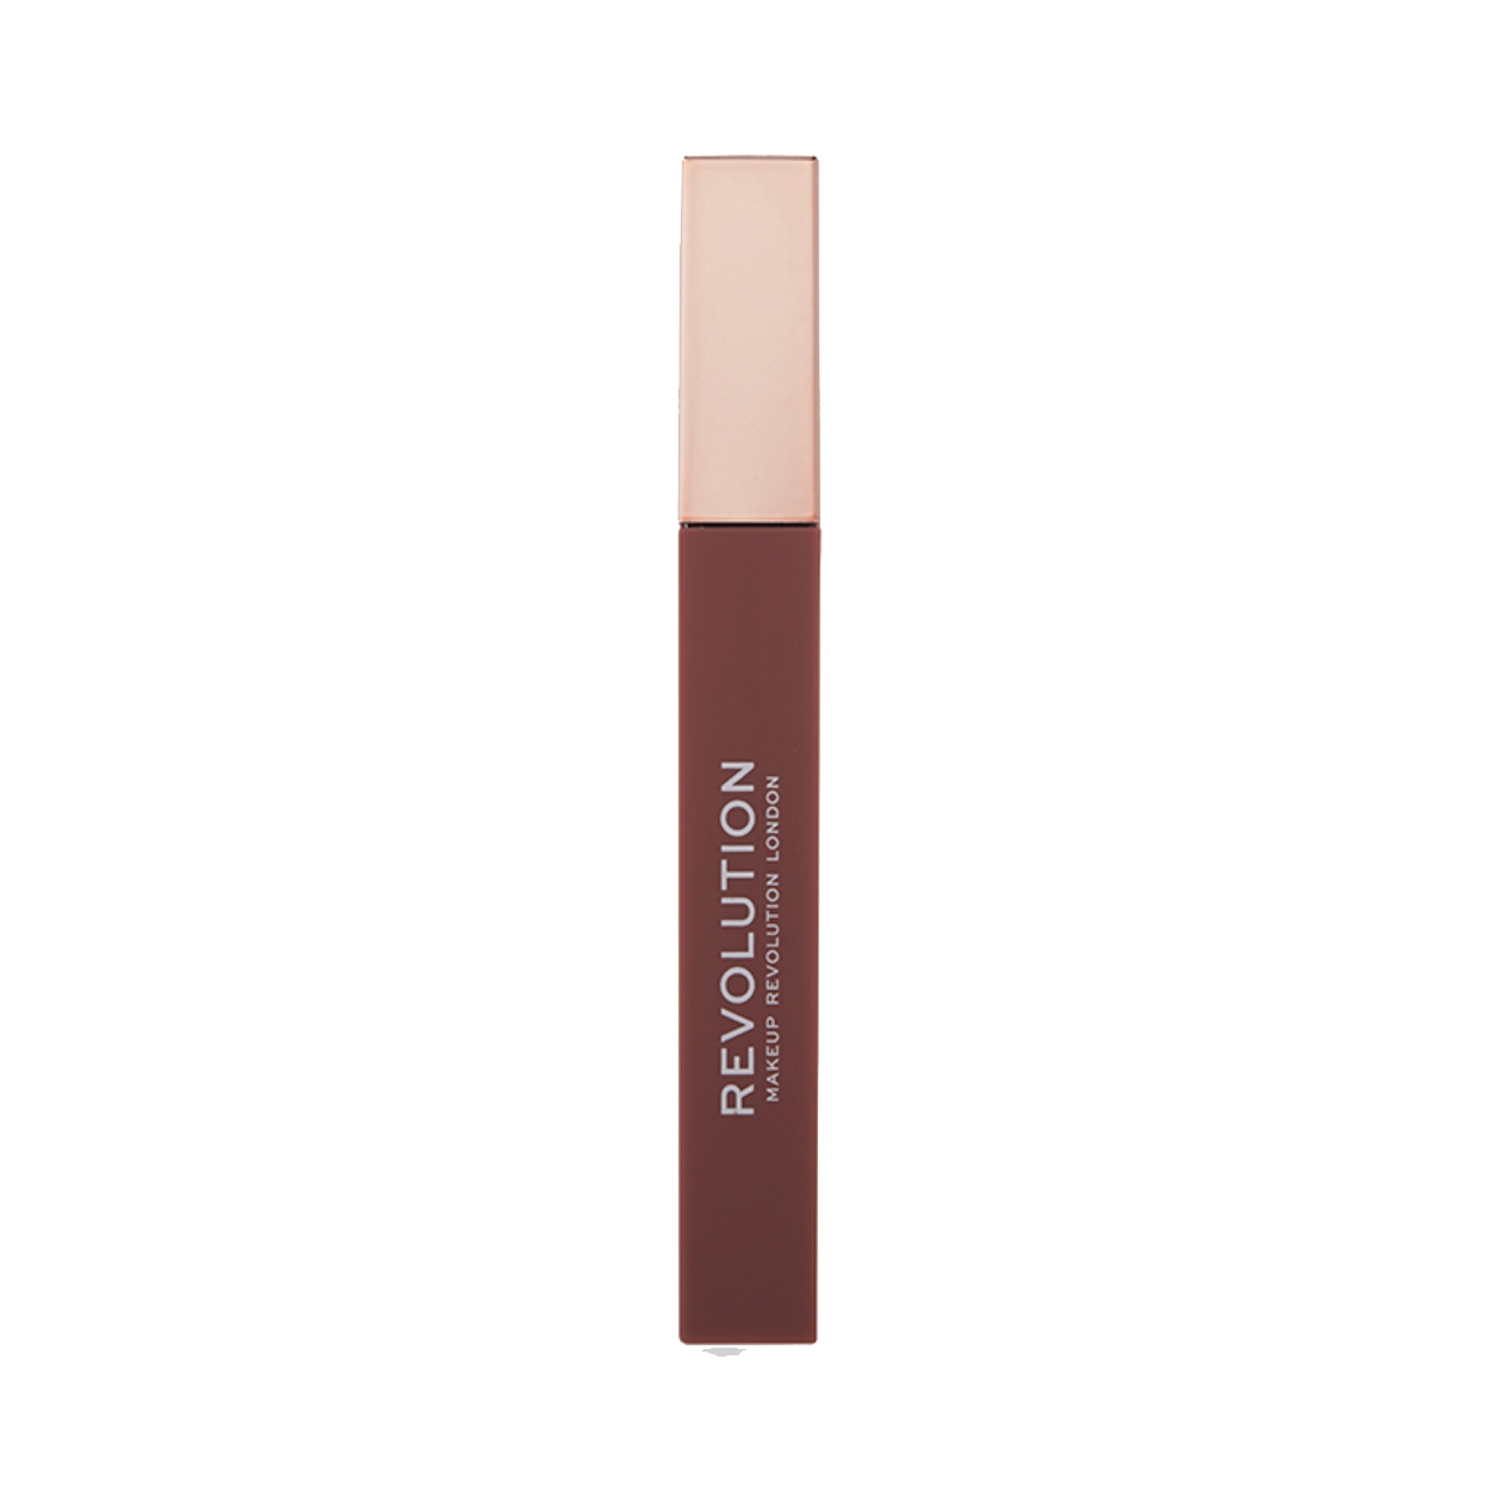 Makeup Revolution | Makeup Revolution Irl Whipped Lip Creme - Frappuccino Nude (1.8ml)